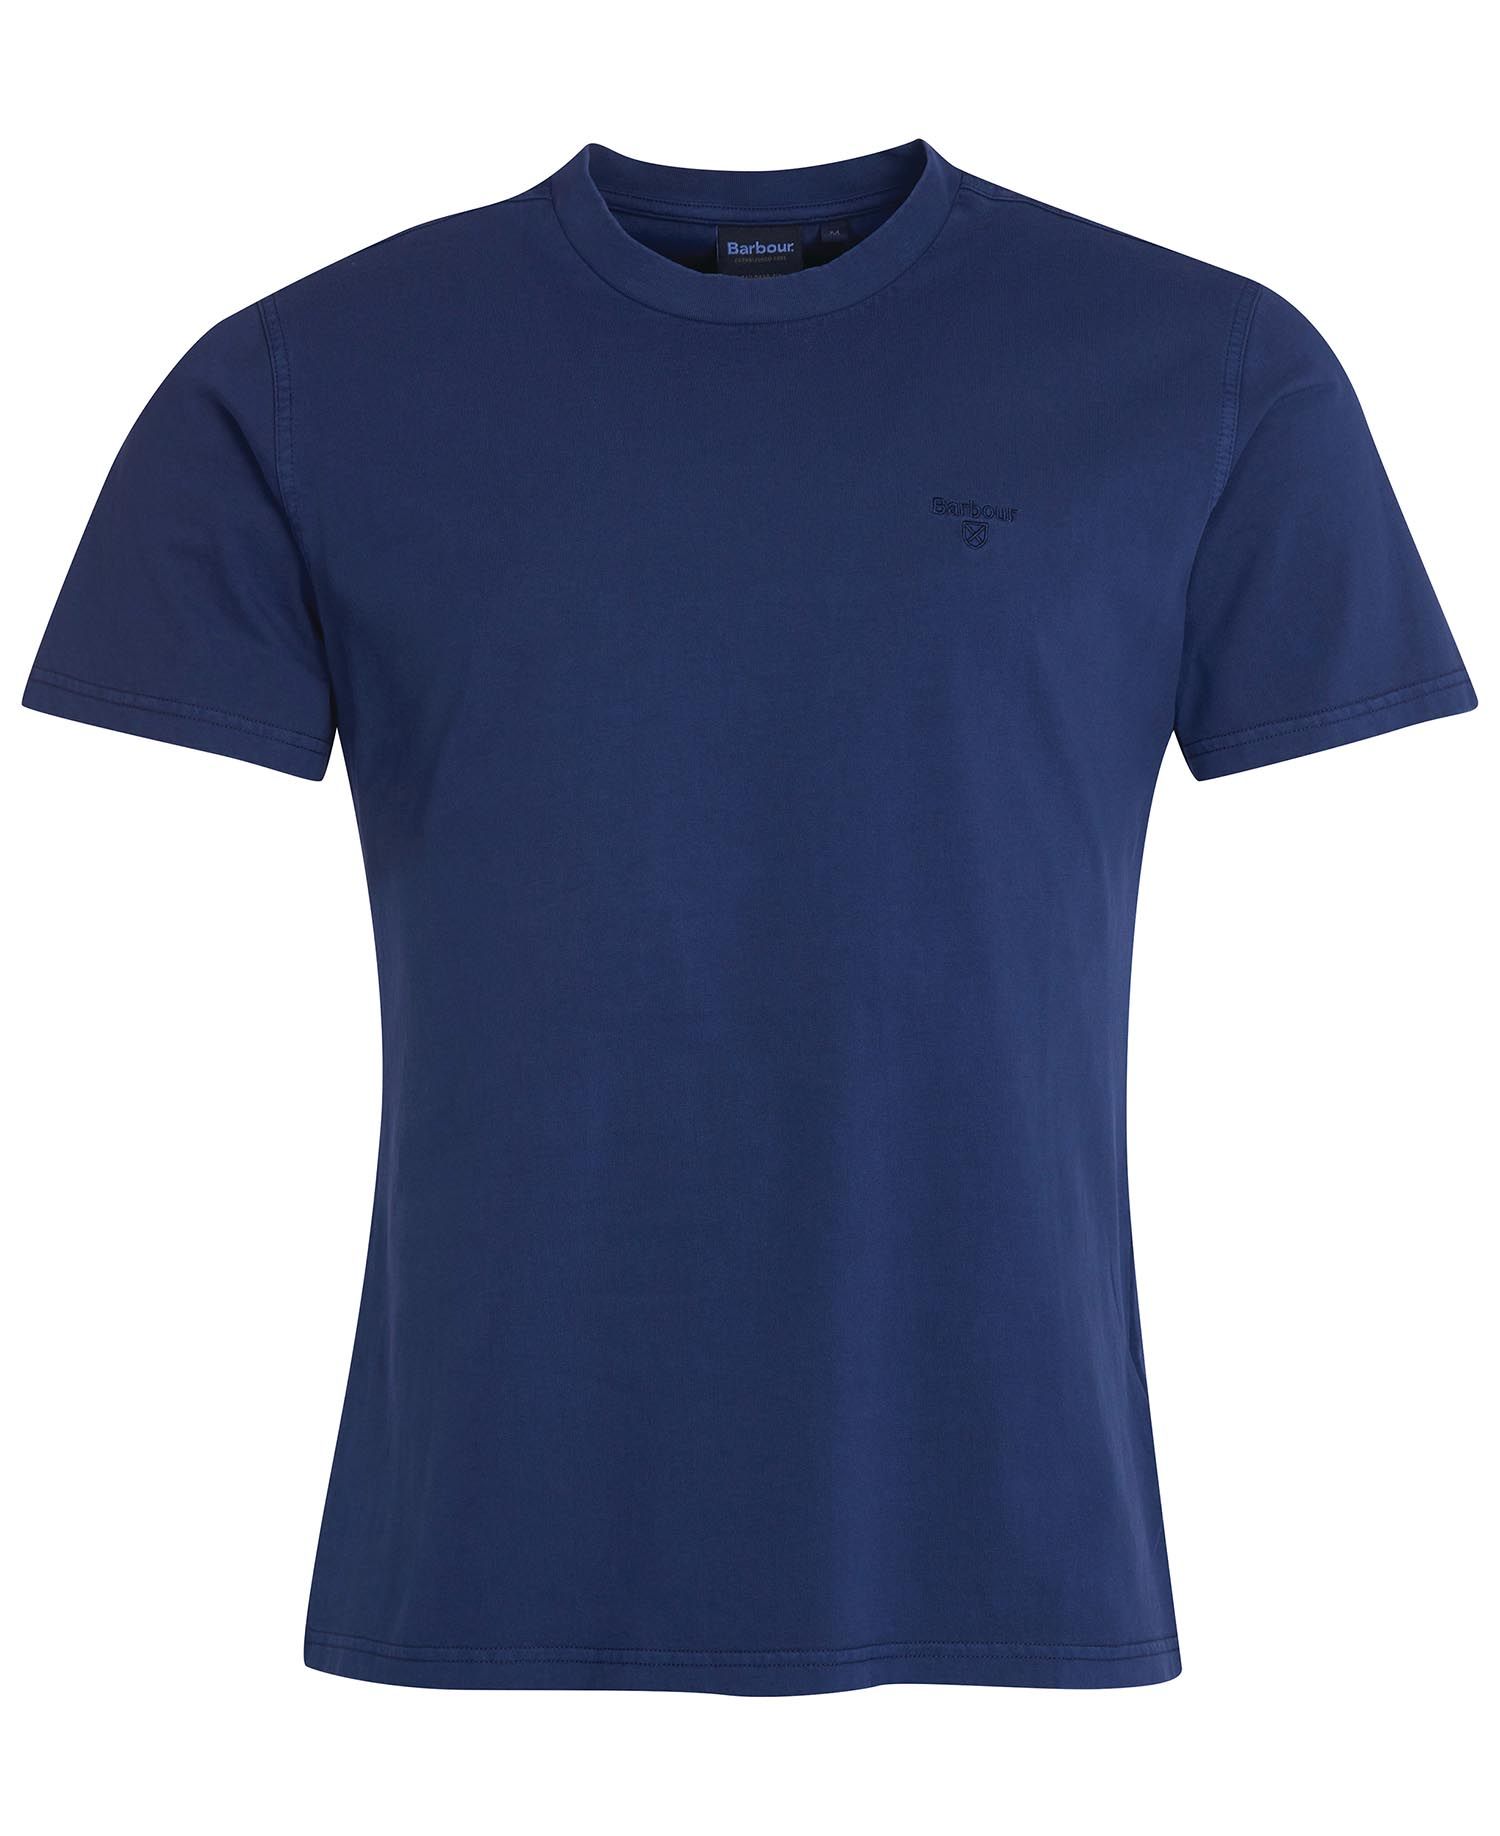 Barbour Barbour Garment Dyed T-shirt Navy